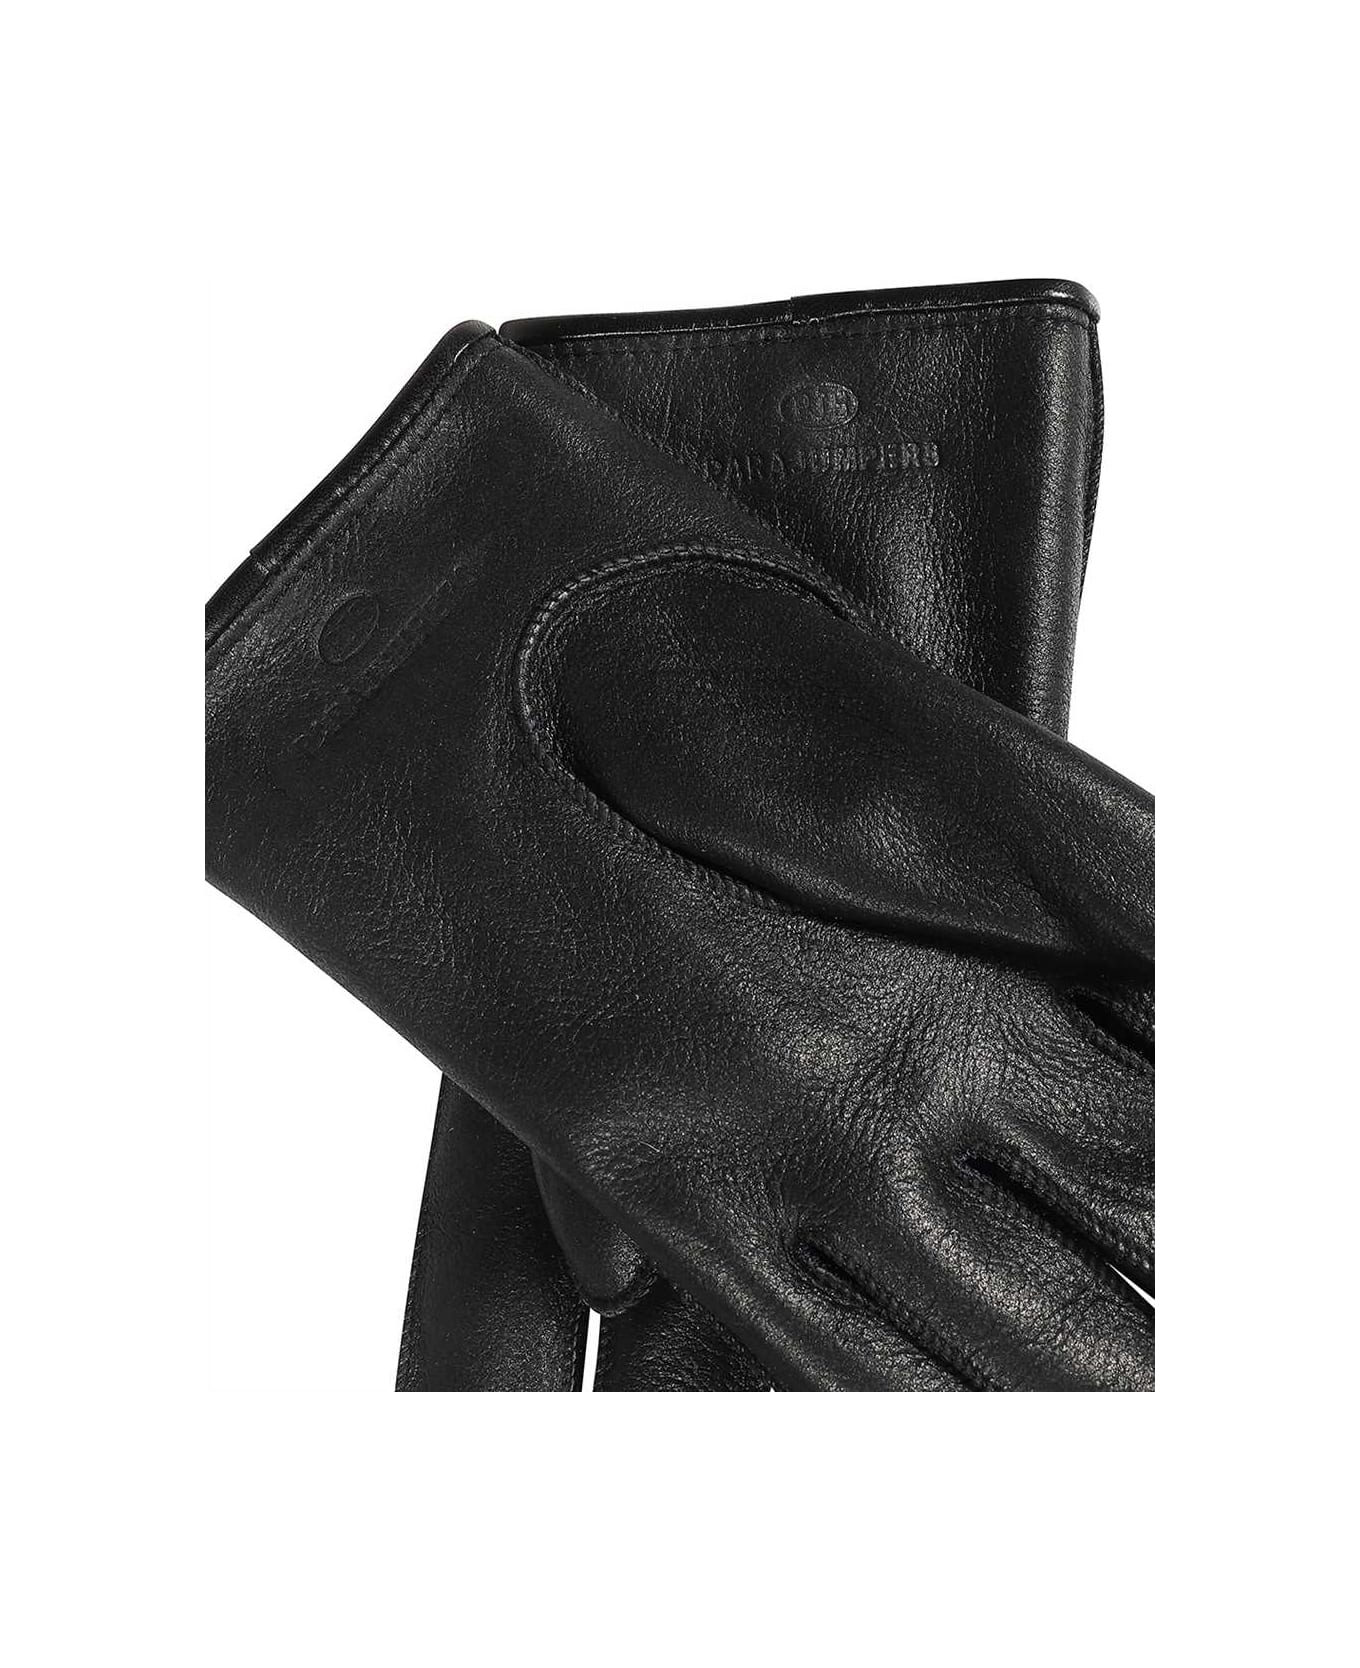 Parajumpers Leather Gloves - black 手袋